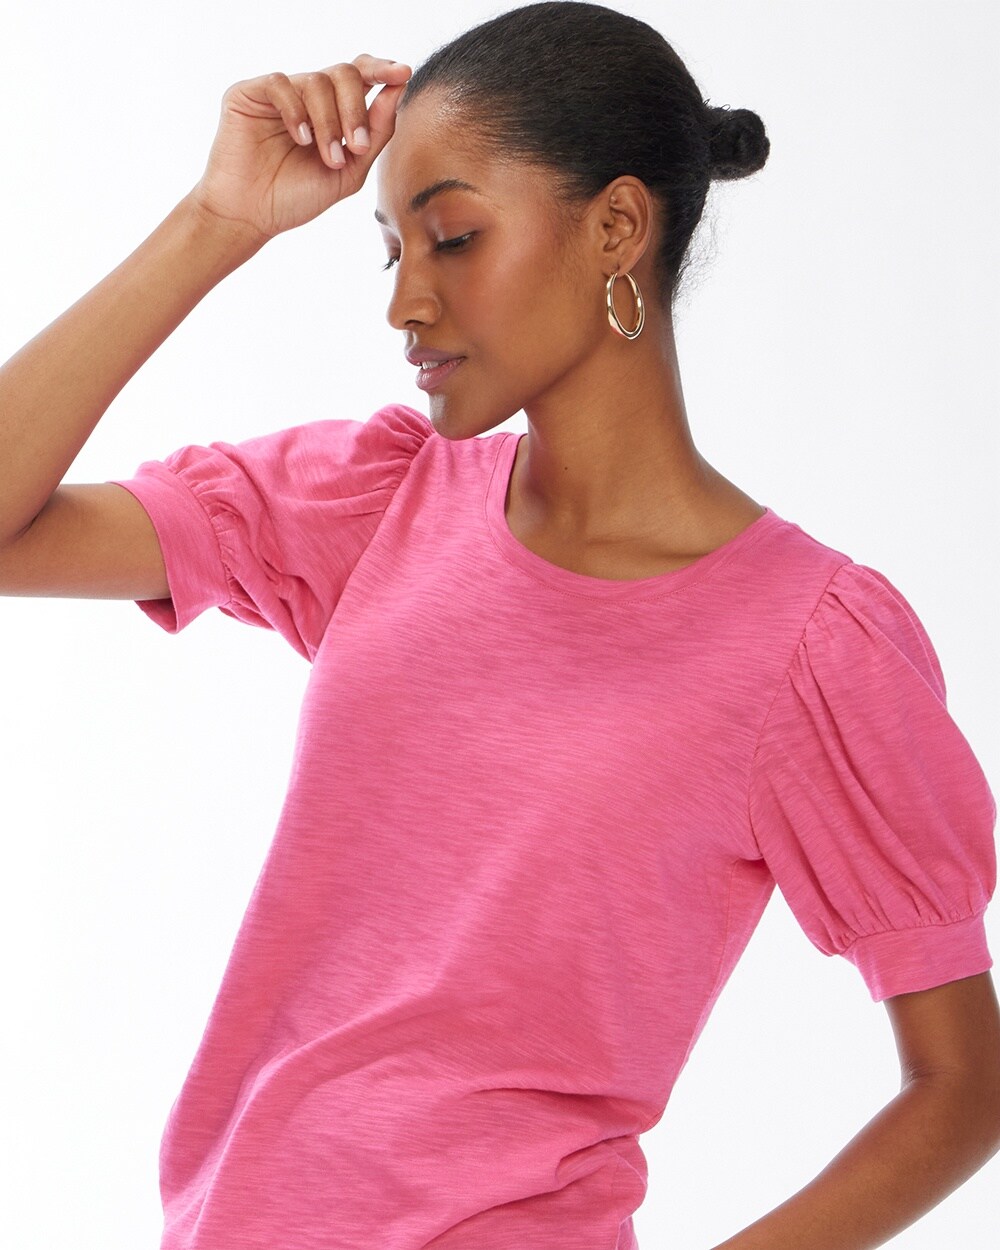 Puff Sleeve Slub Tee video preview image, click to start video